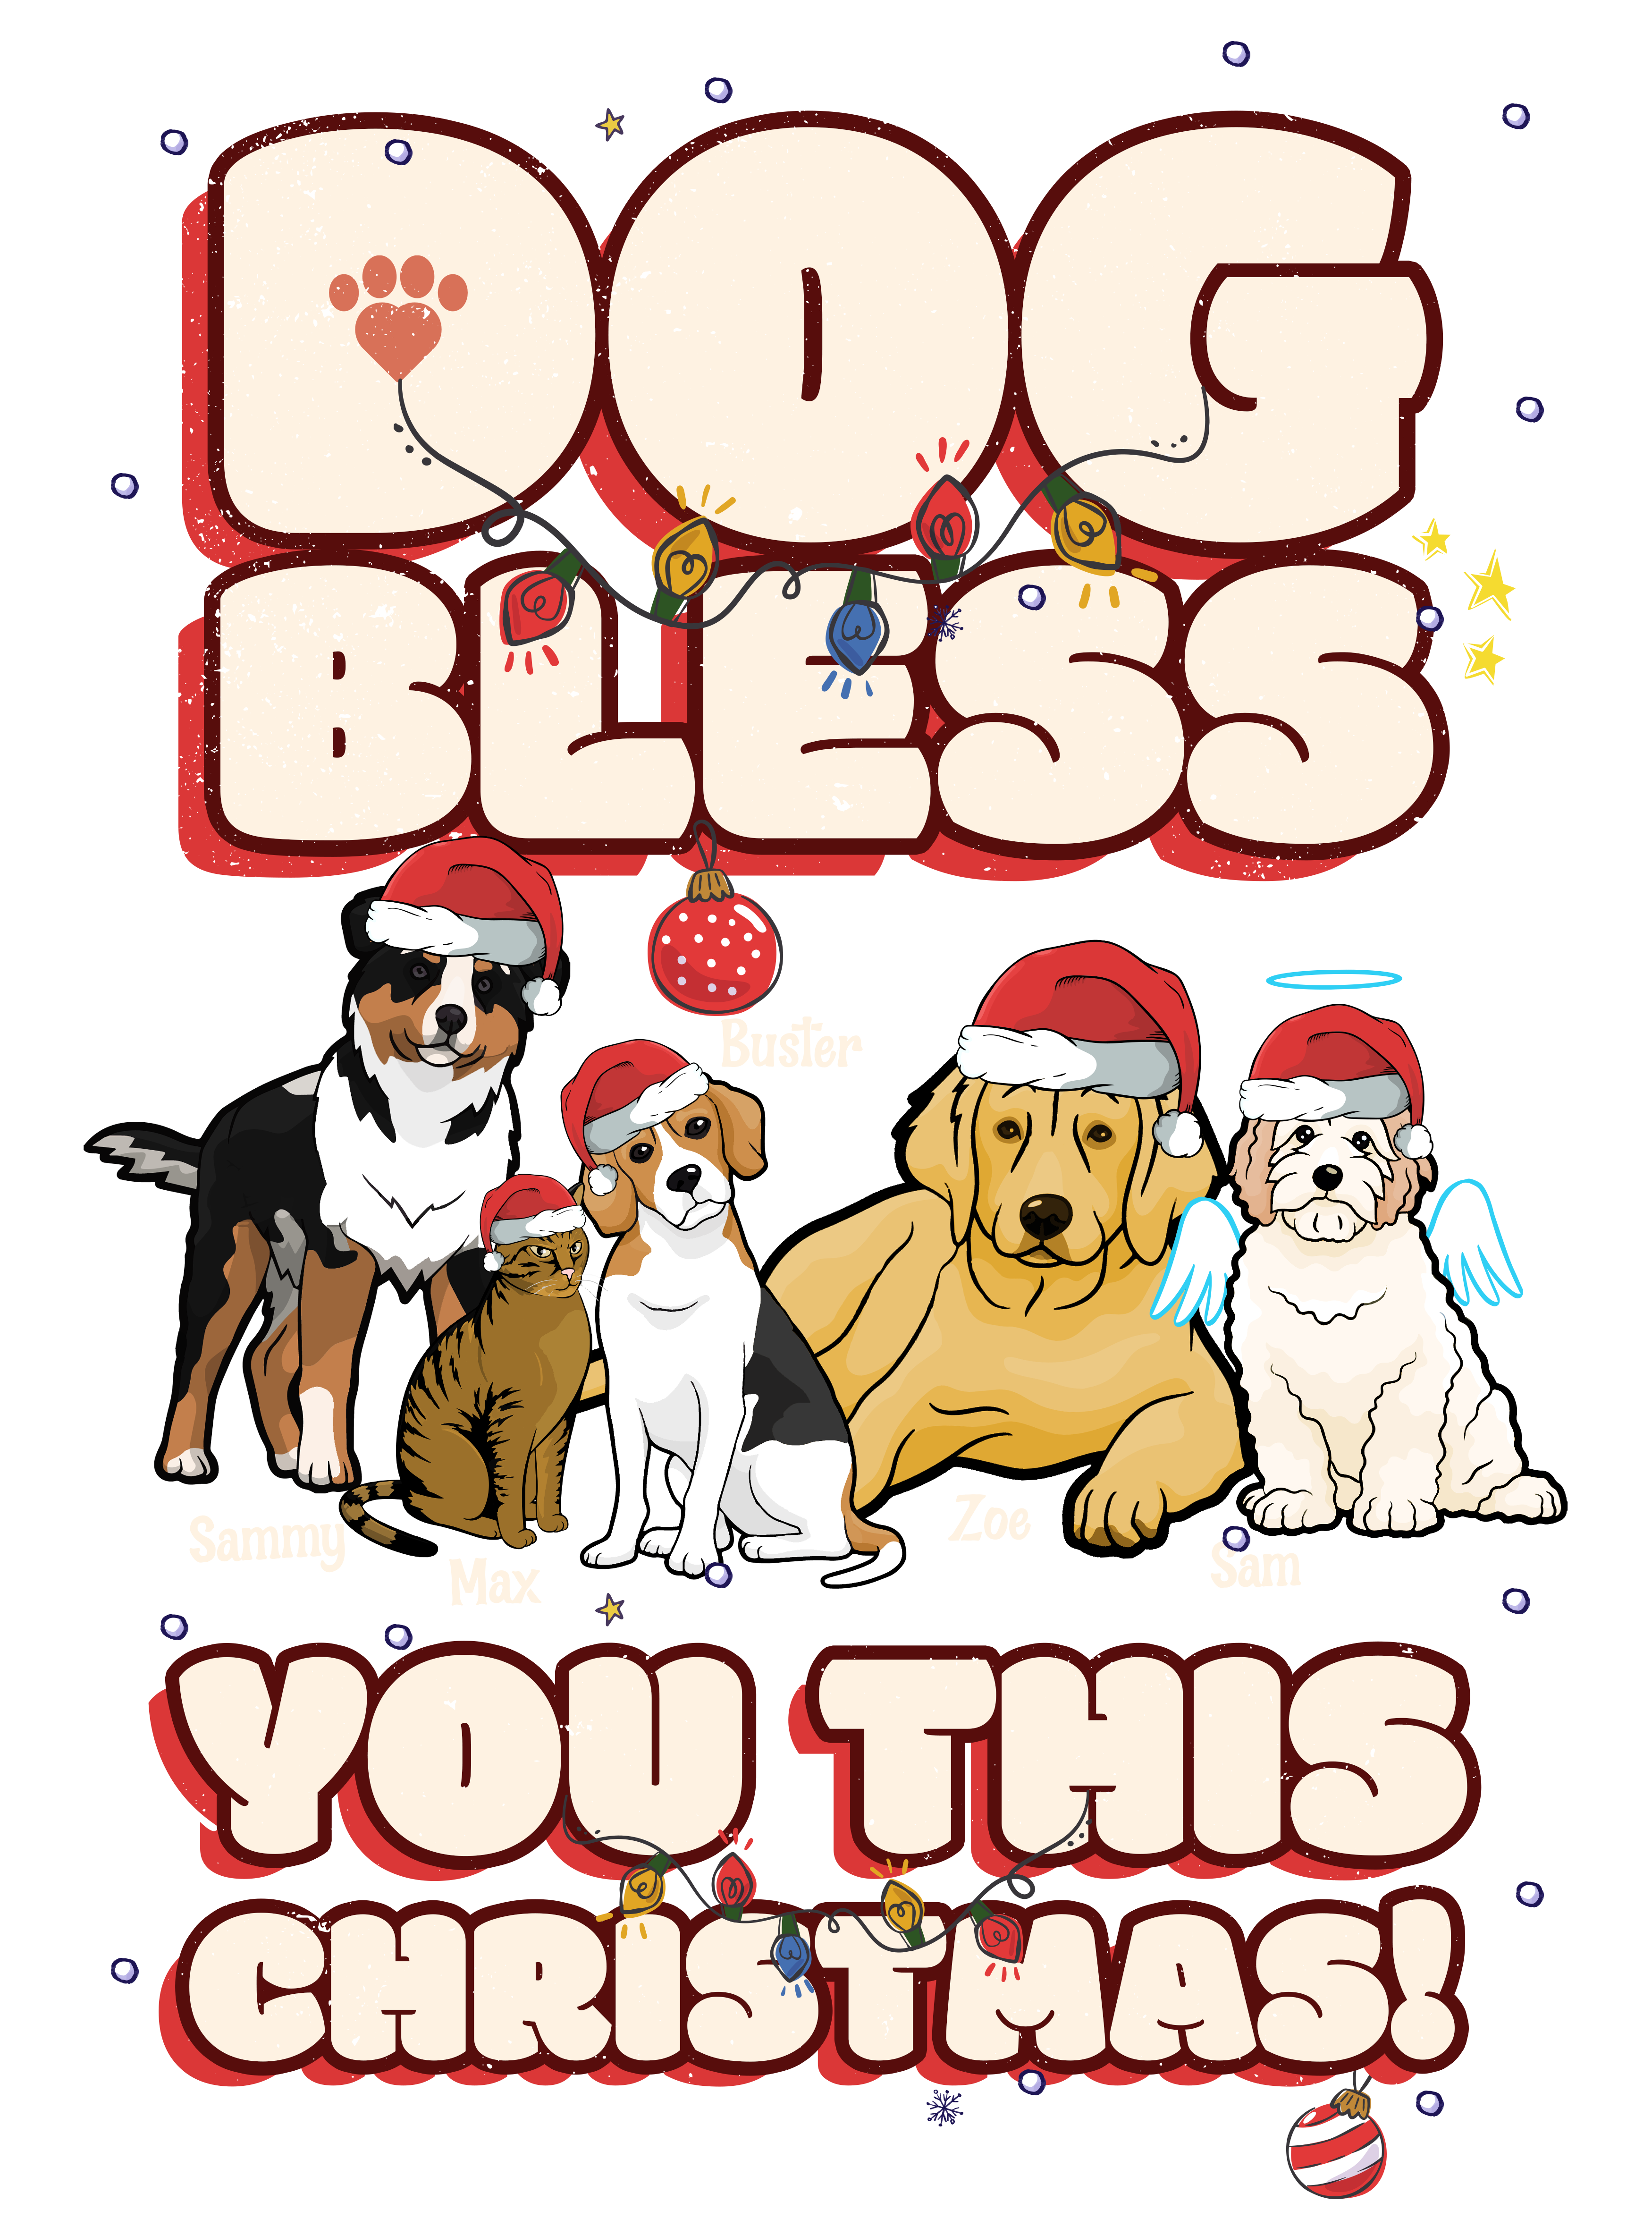 Dog Bless You This Christmas Customized Hoodie for Pet Lovers